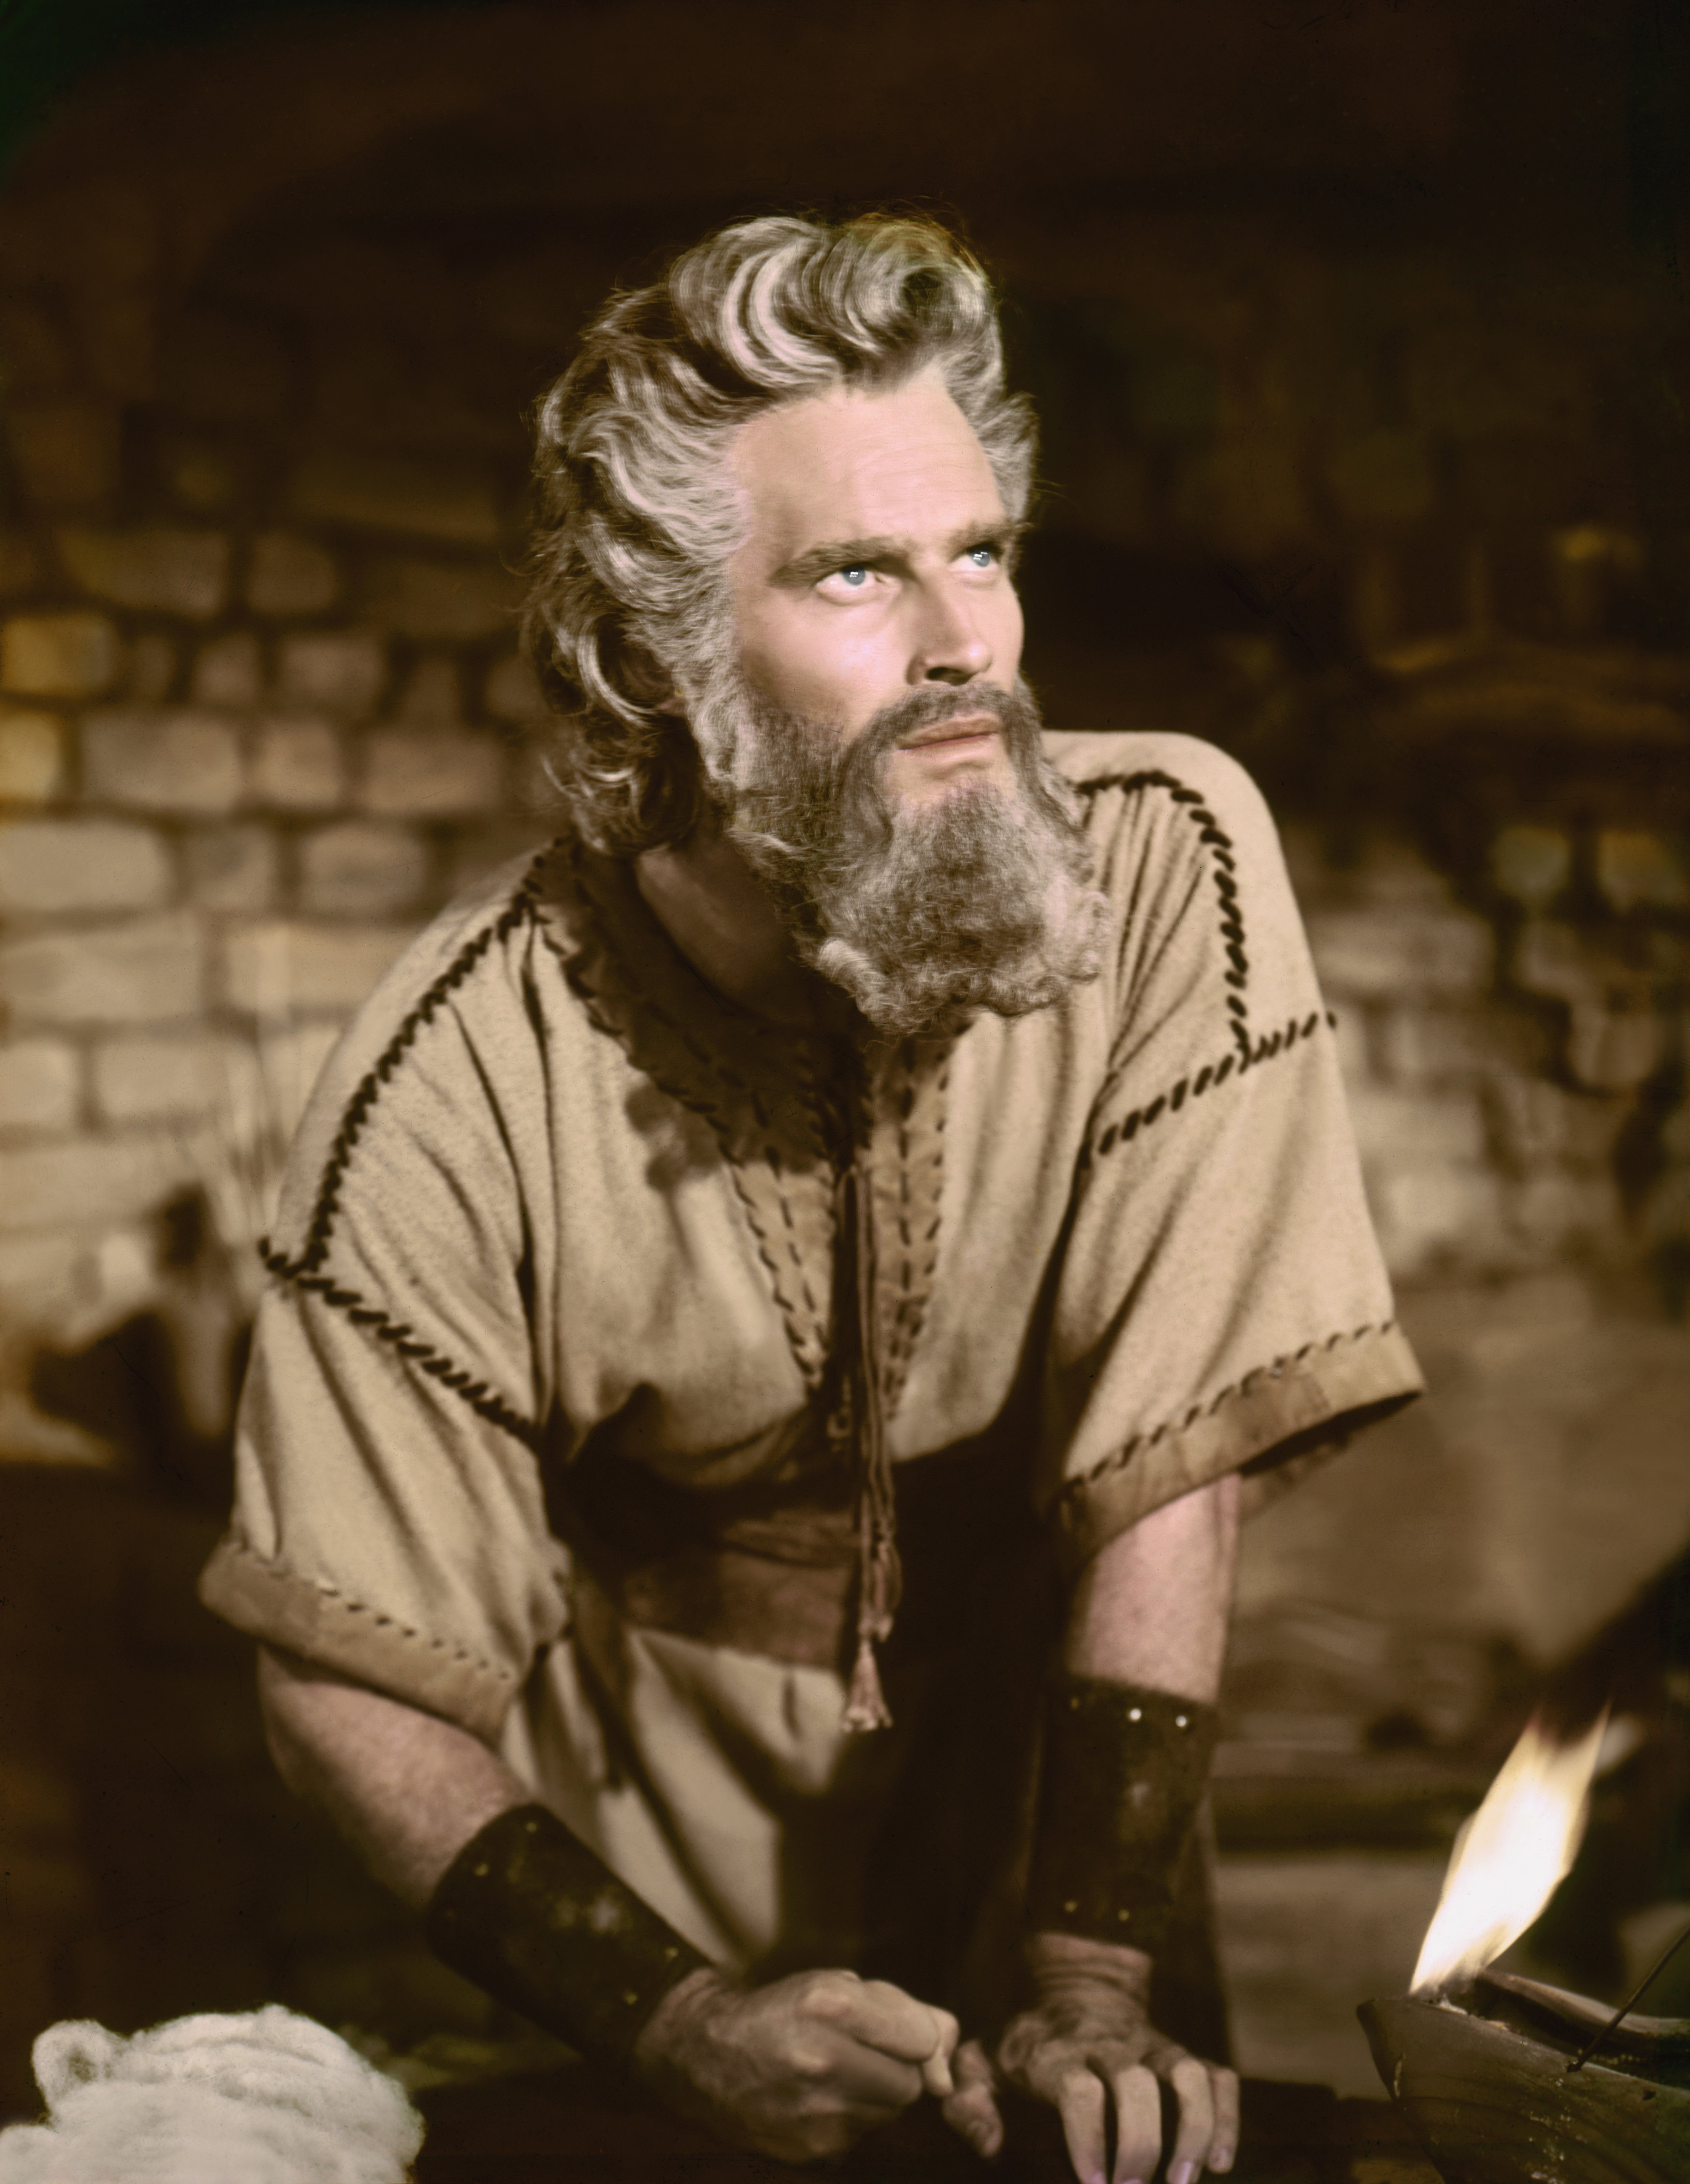 Charlton Heston on the set of "The Ten Commandments," directed by Cecil B. DeMille. | Source: Getty Images